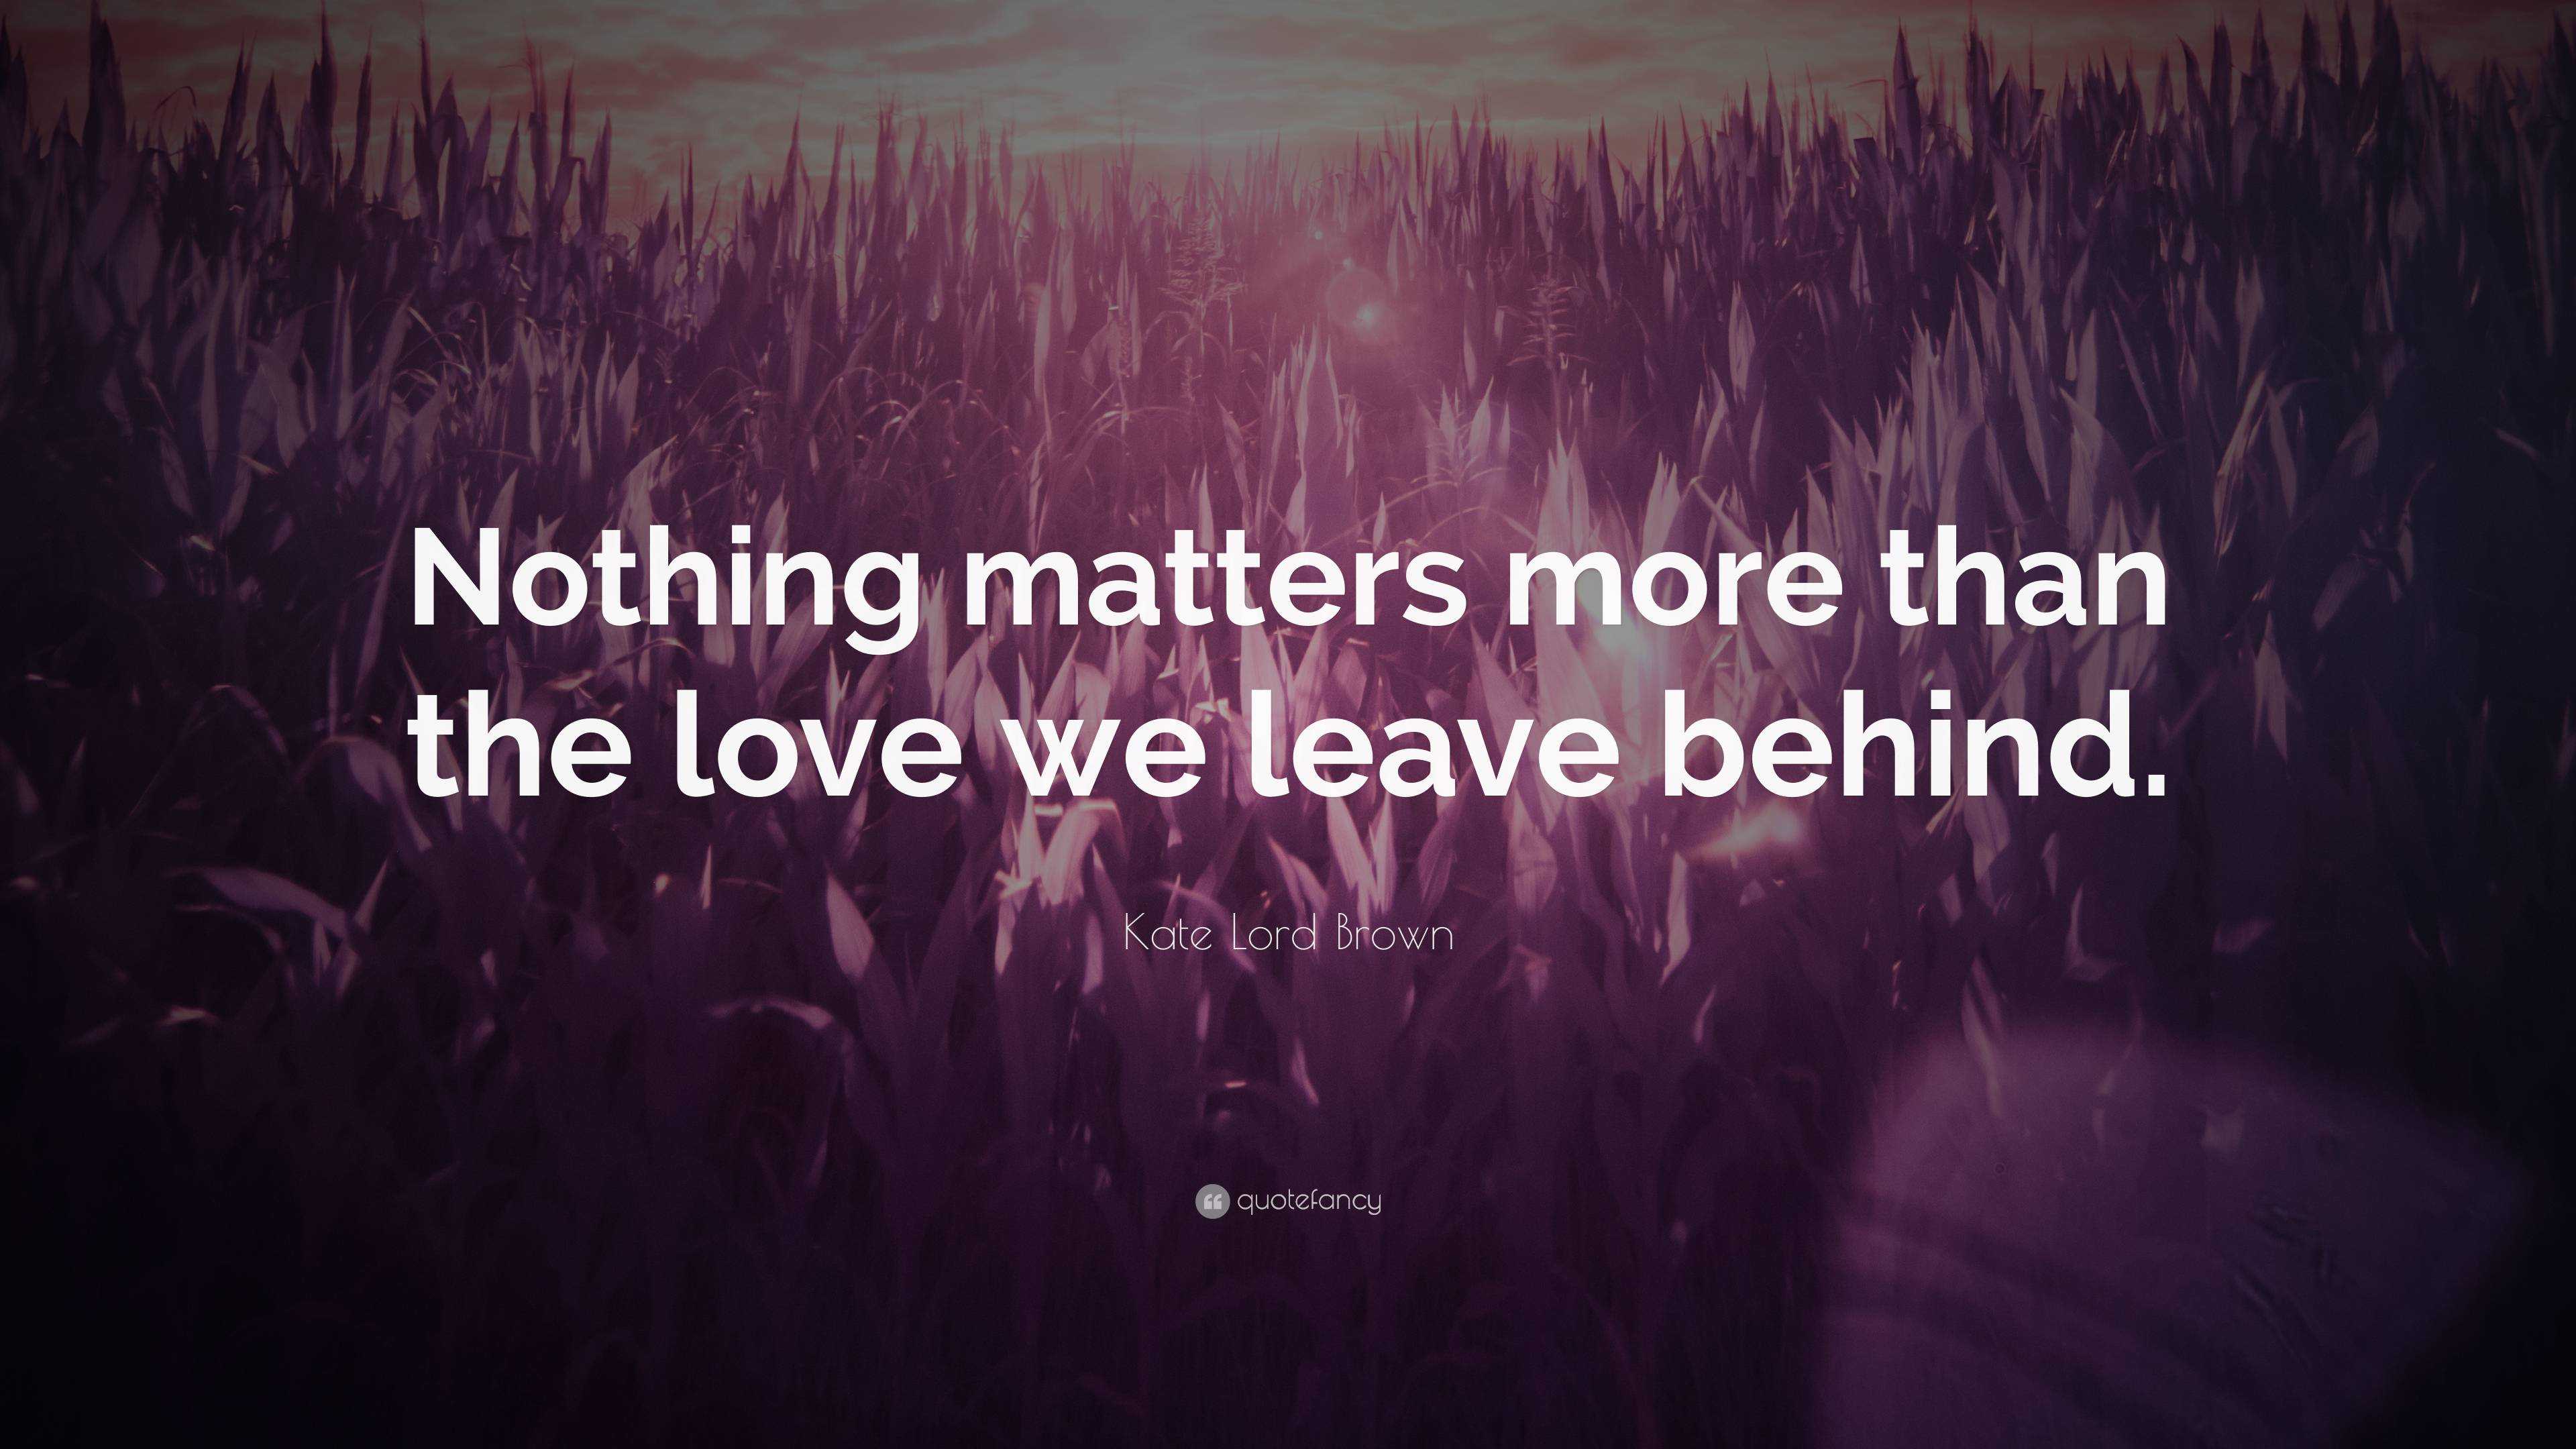 Kate Lord Brown Quote: “Nothing matters more than the love we leave ...